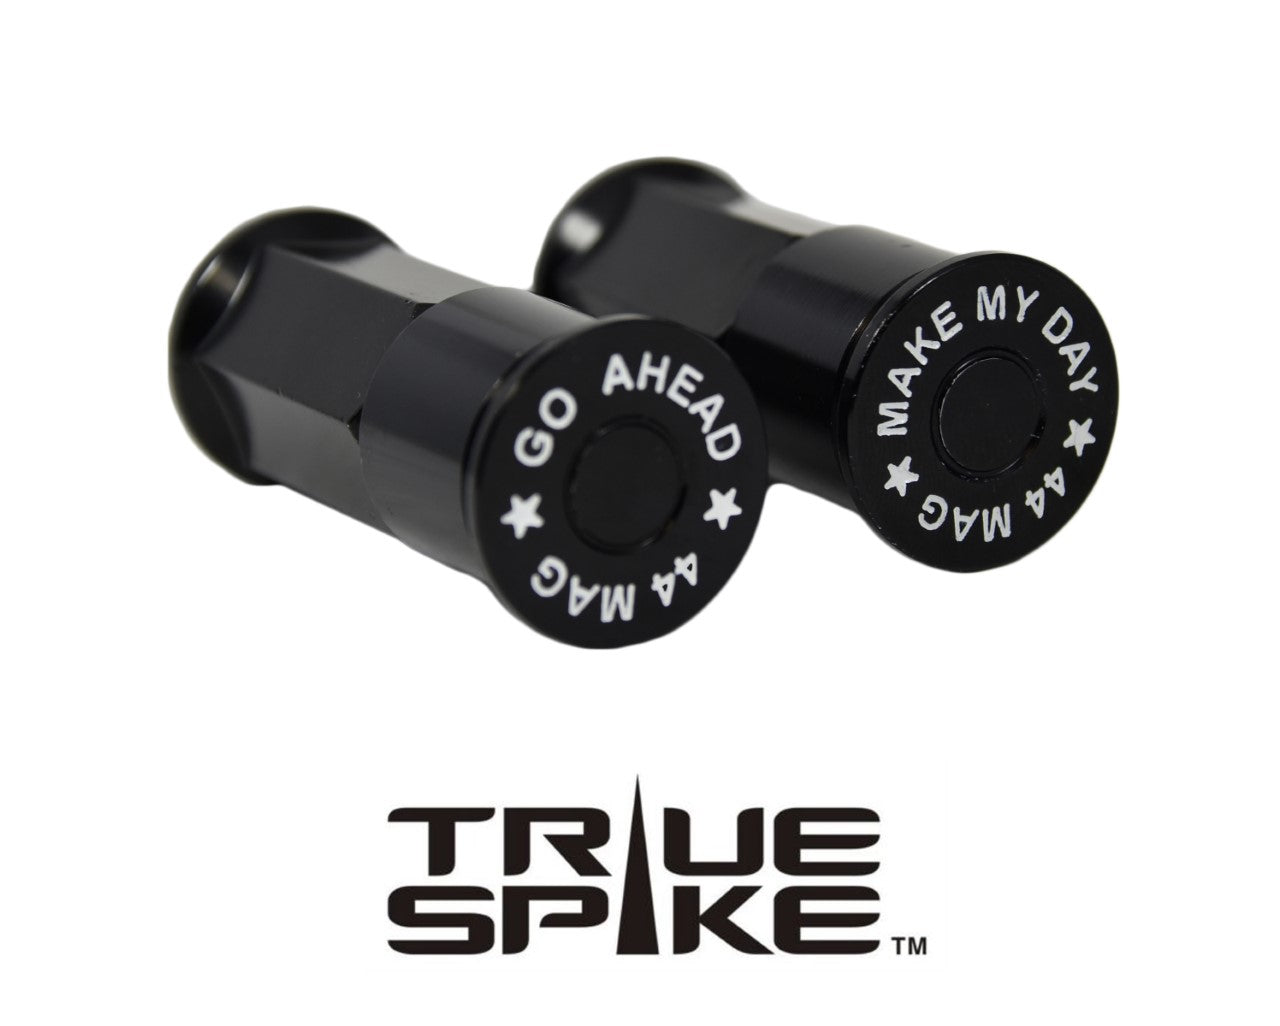 9/16-18 73 MM LONG FORGED STEEL "GO AHEAD MAKE MY DAY" LUG NUTS WITH A  VMS Racing